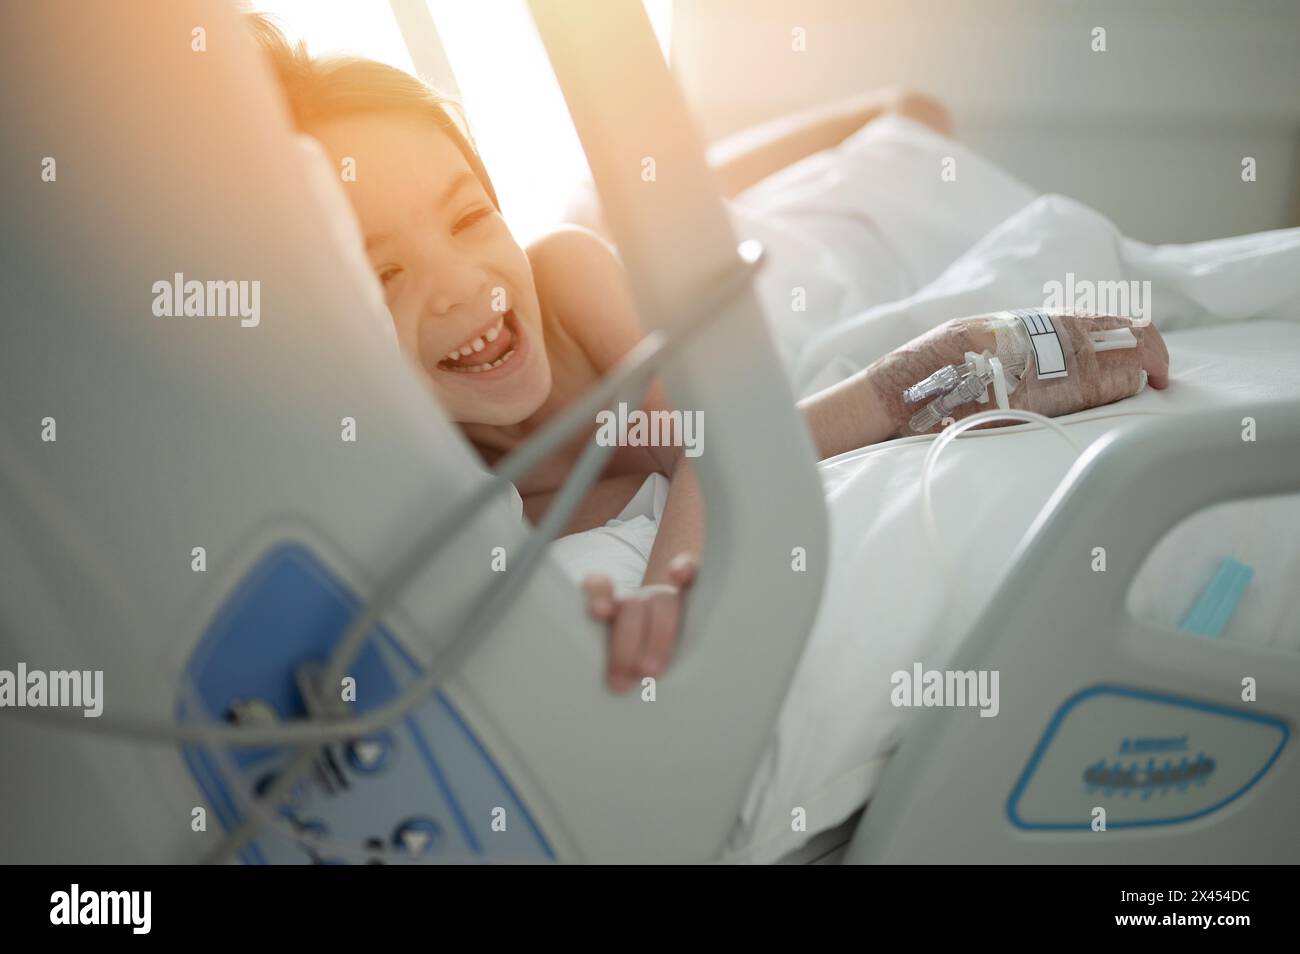 Smiling kid girl in hospital bed with treatment iv from illness Stock Photo